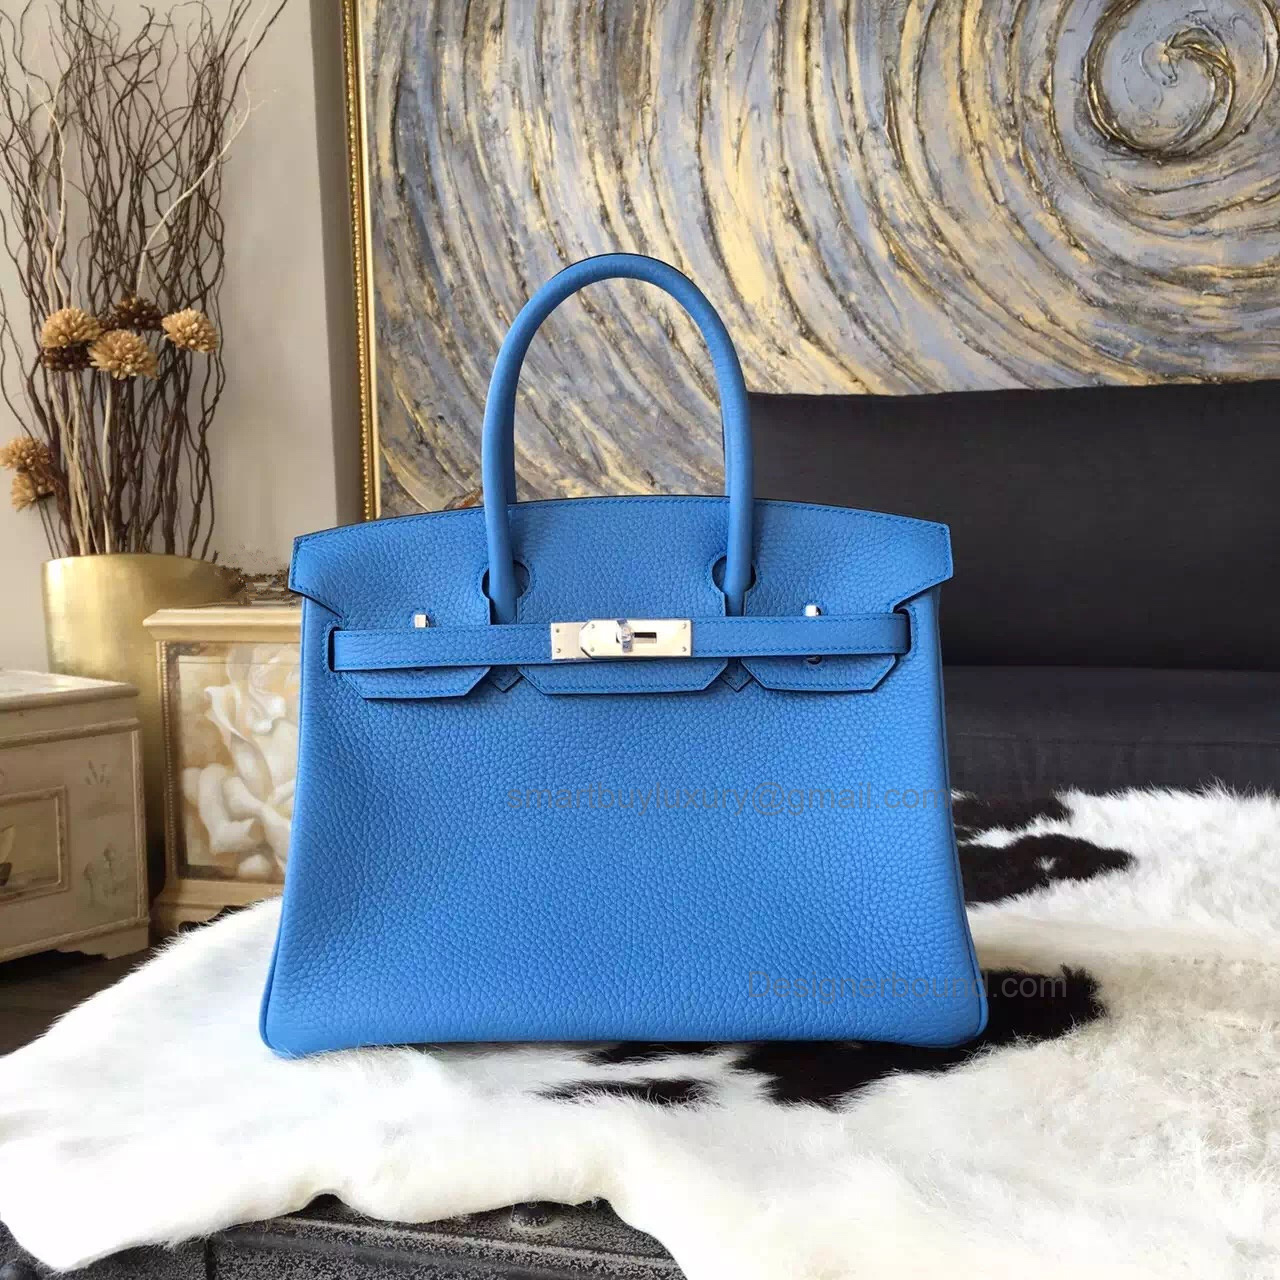 Hand Stitched Hermes Birkin 30 Bag in 2t Blue Paradise Clemence Calfskin SHW